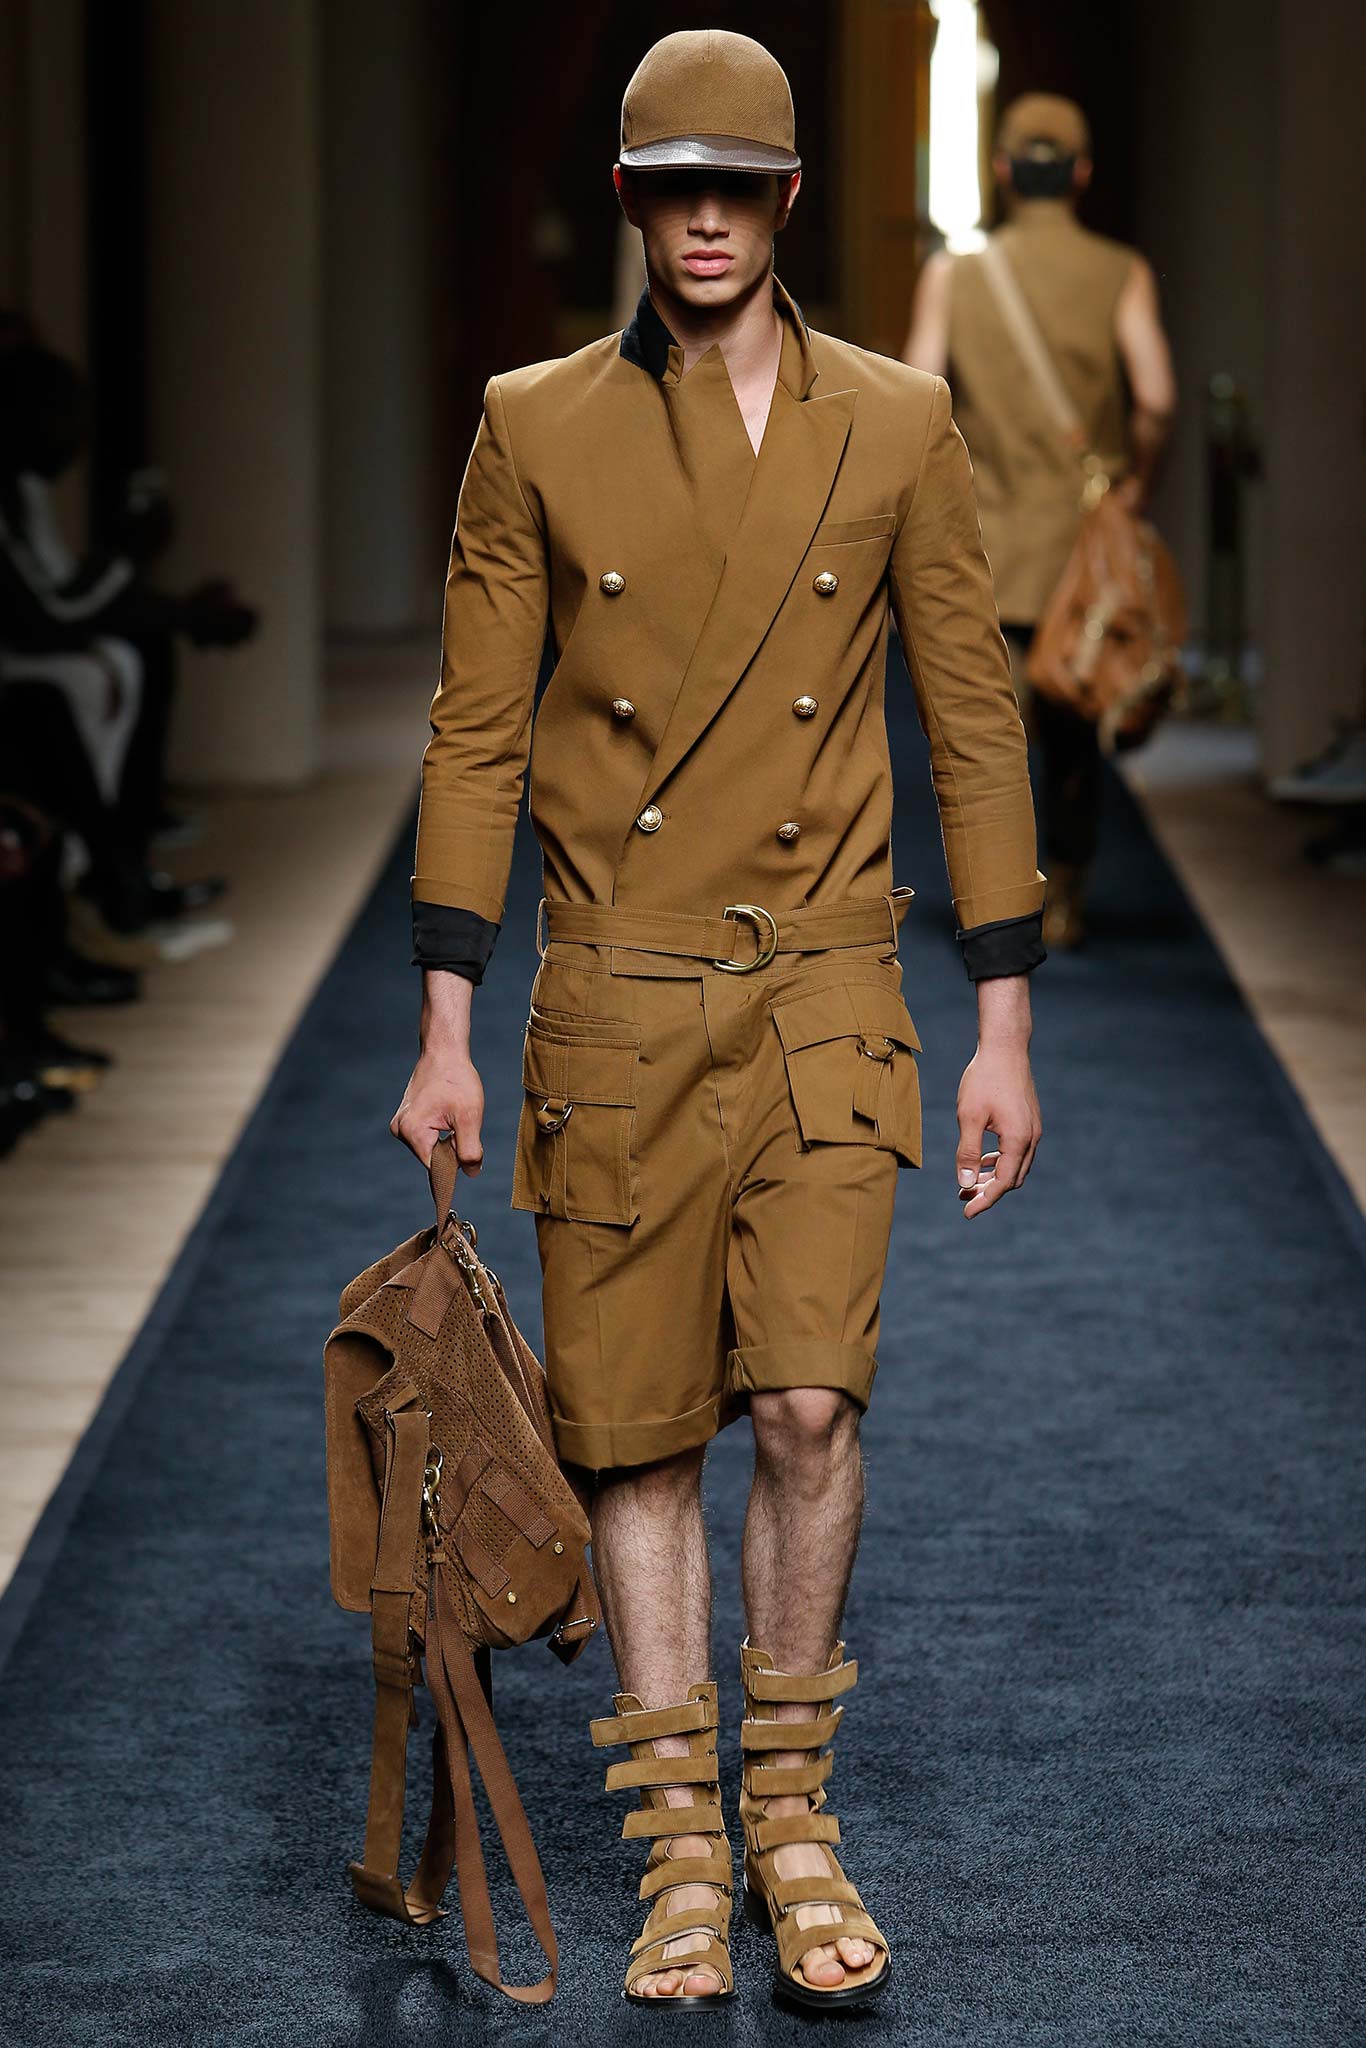 spring-2016-menswear-trends-06-jumpsuits-02